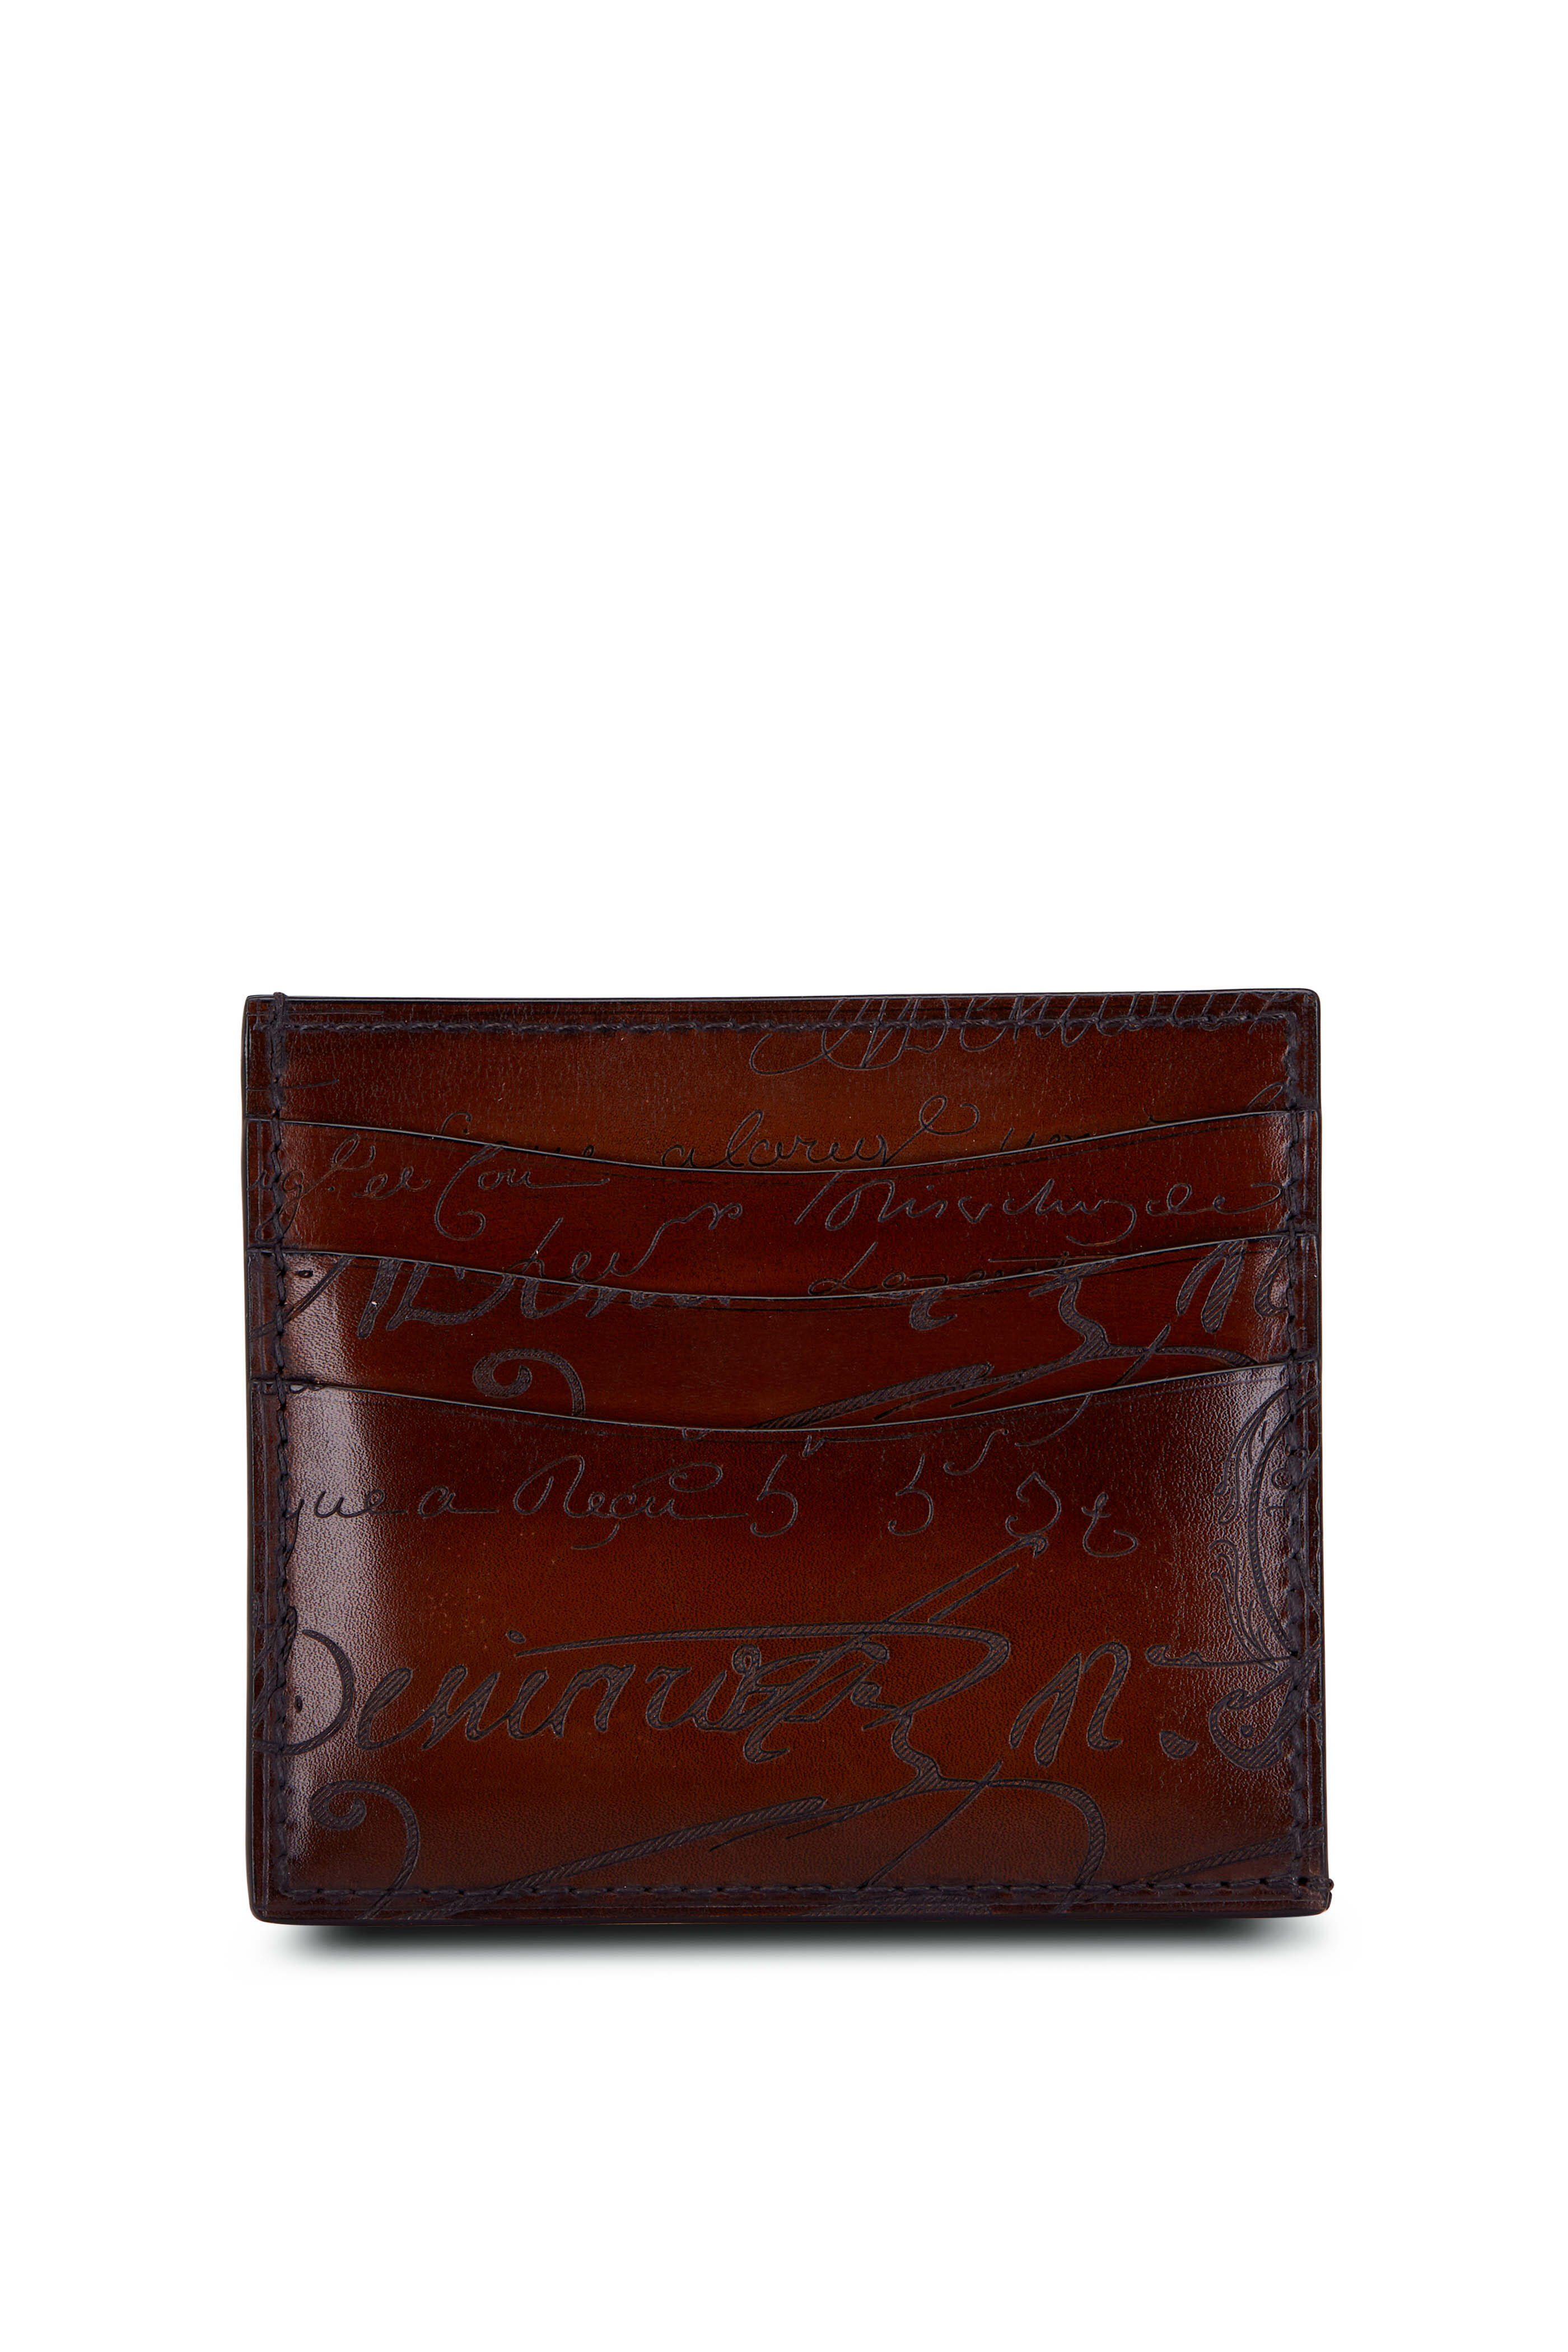 Berluti - Bambou Scritto Cacao Intenso Leather Card Holder